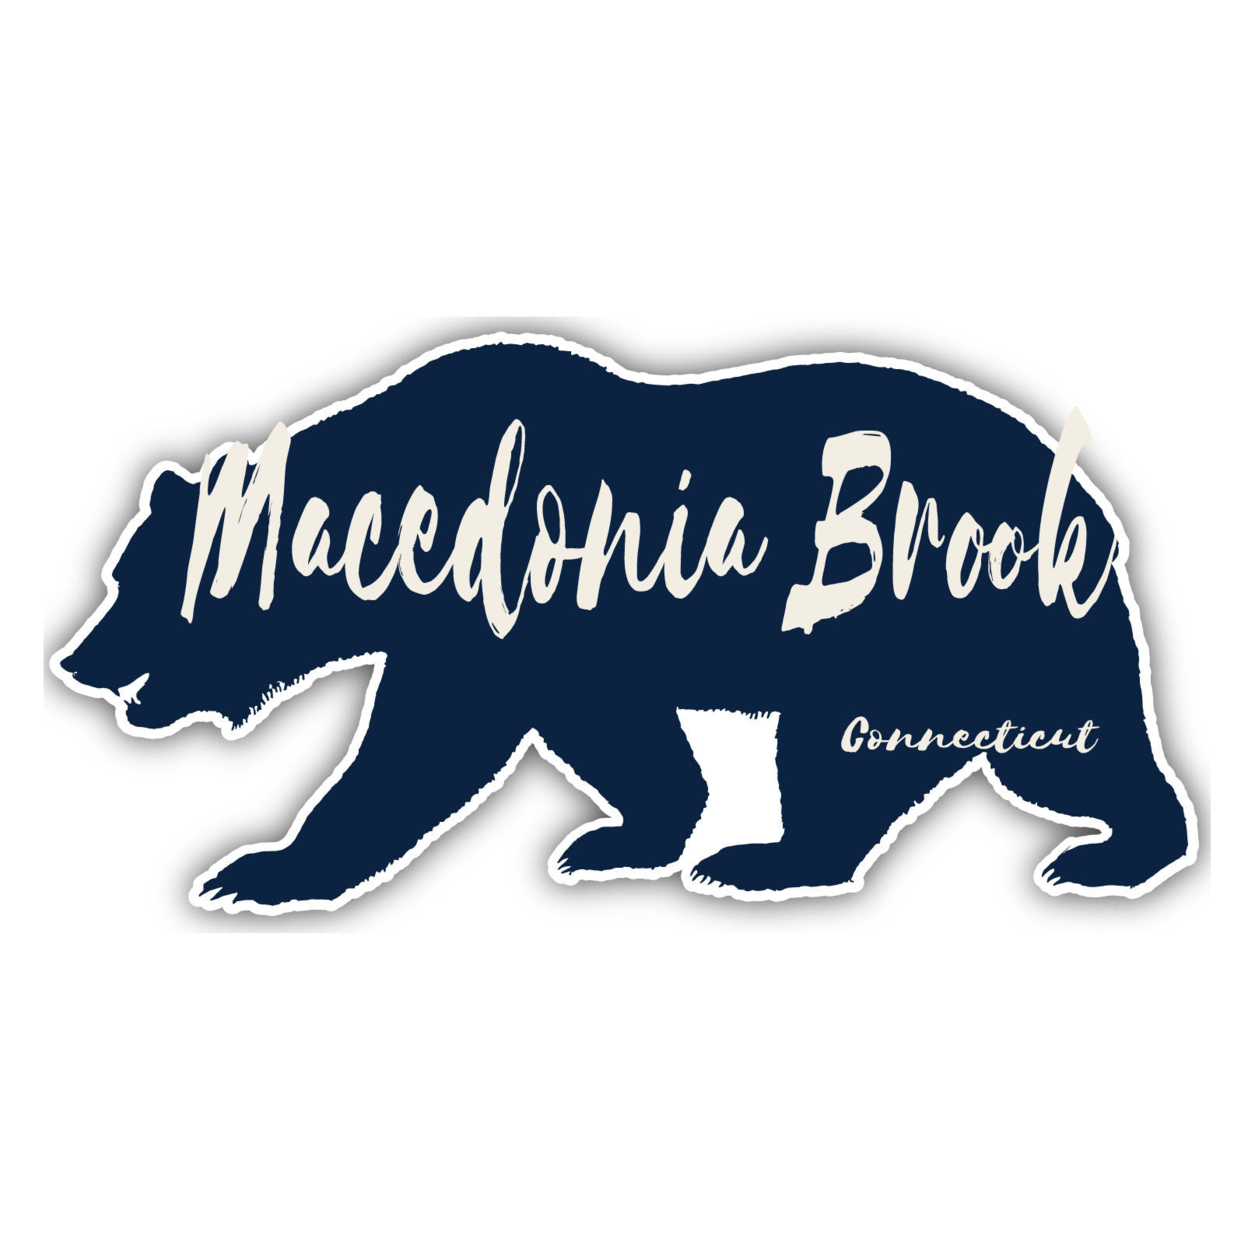 Macedonia Brook Connecticut Souvenir Decorative Stickers (Choose Theme And Size) - 4-Inch, Bear